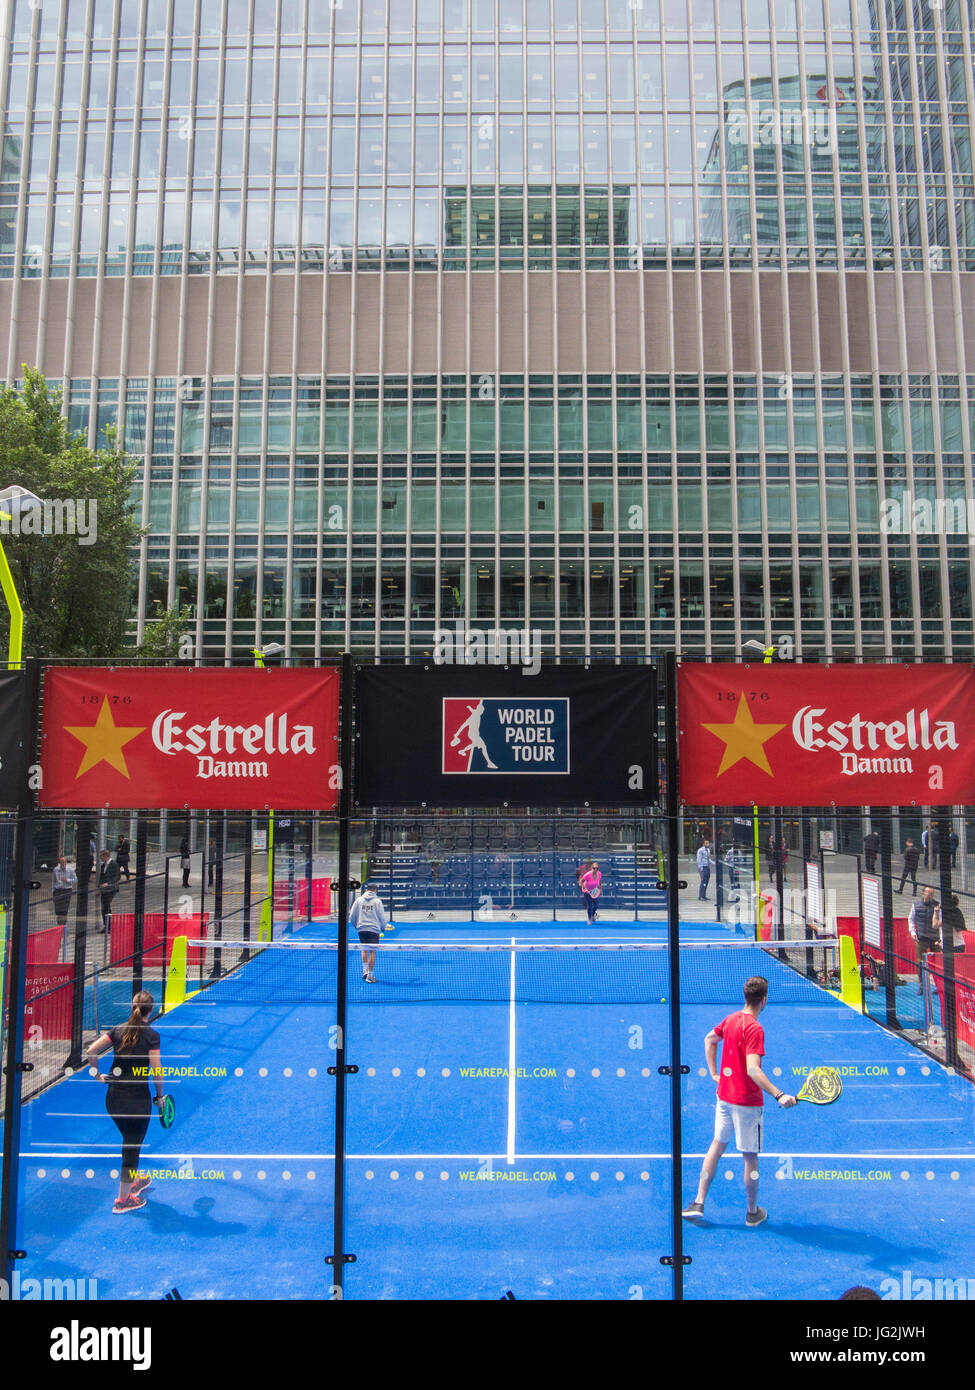 Padel tennis in the Docklands area of London, surrounded by high rise offices Stock Photo